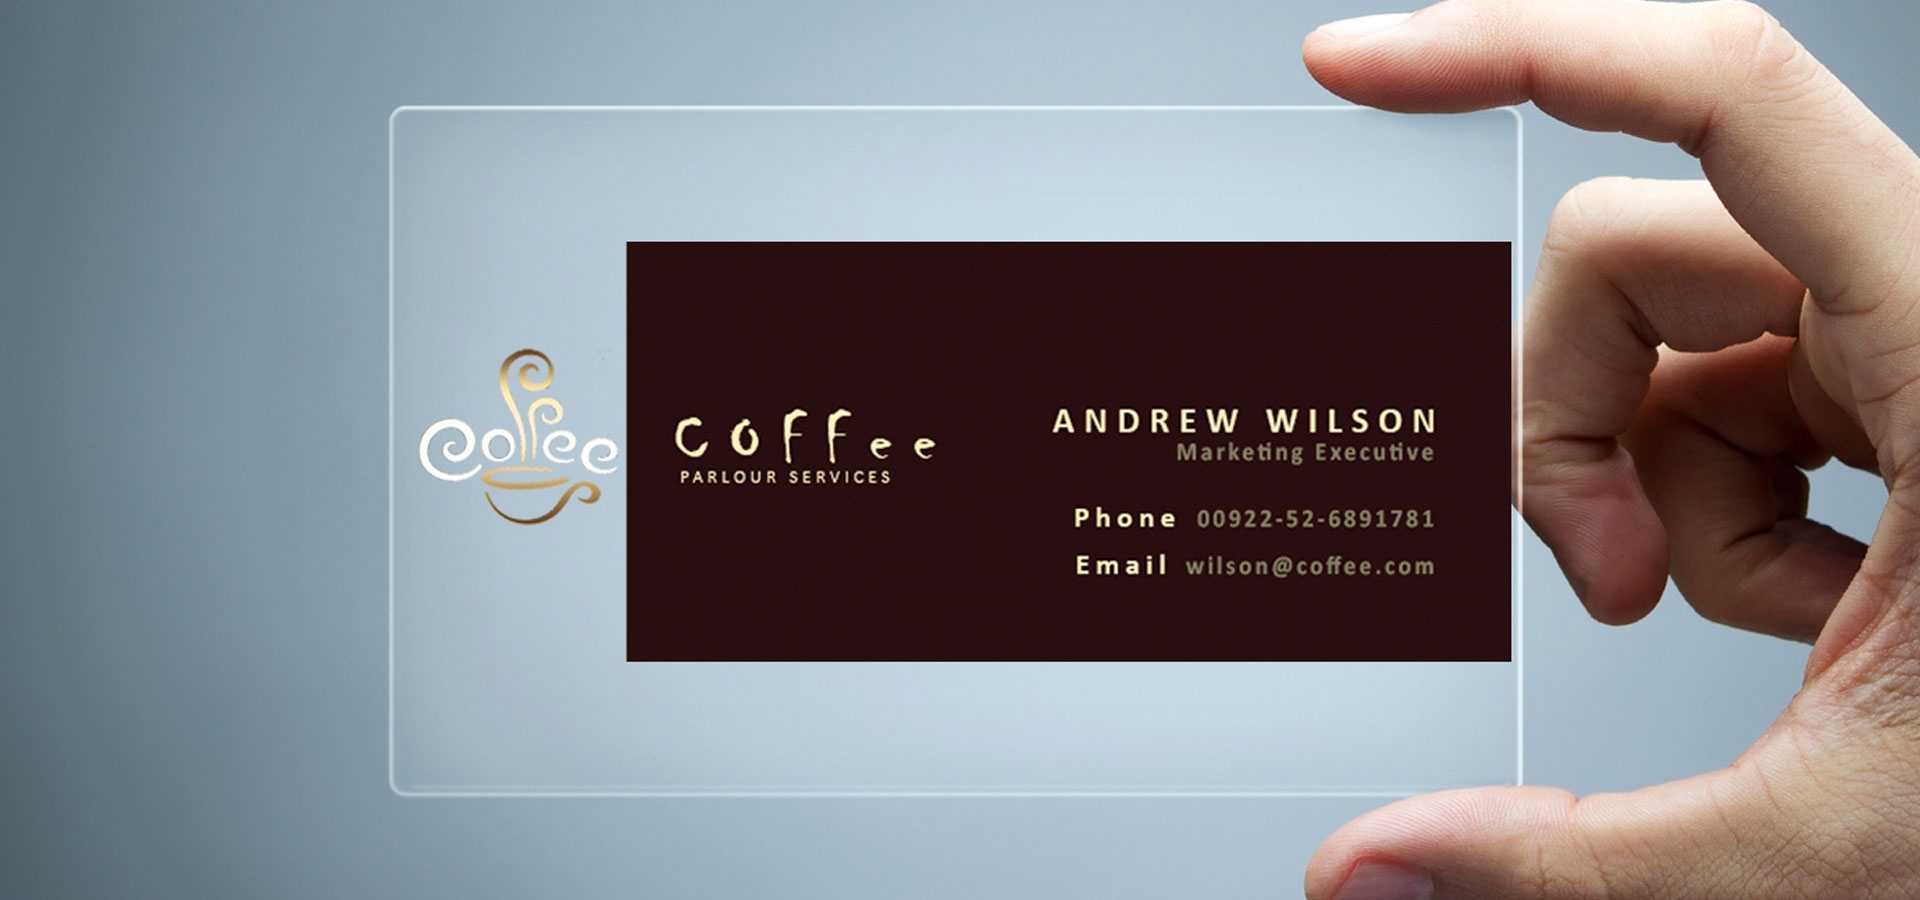 26+ Transparent Business Card Templates - Illustrator, Ms In Business Cards For Teachers Templates Free